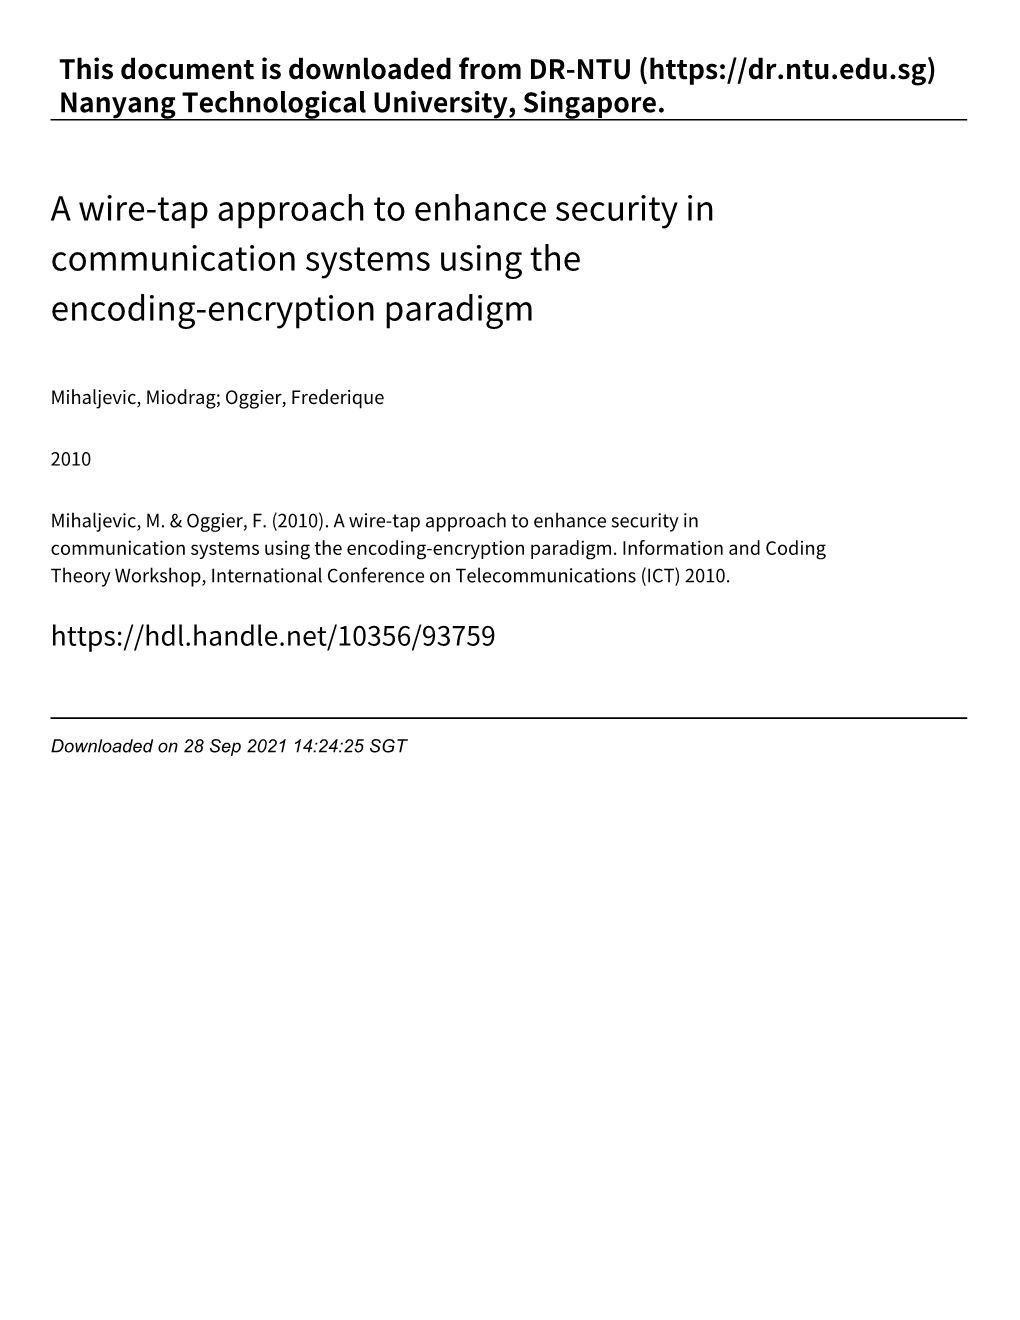 A Wire‑Tap Approach to Enhance Security in Communication Systems Using the Encoding‑Encryption Paradigm